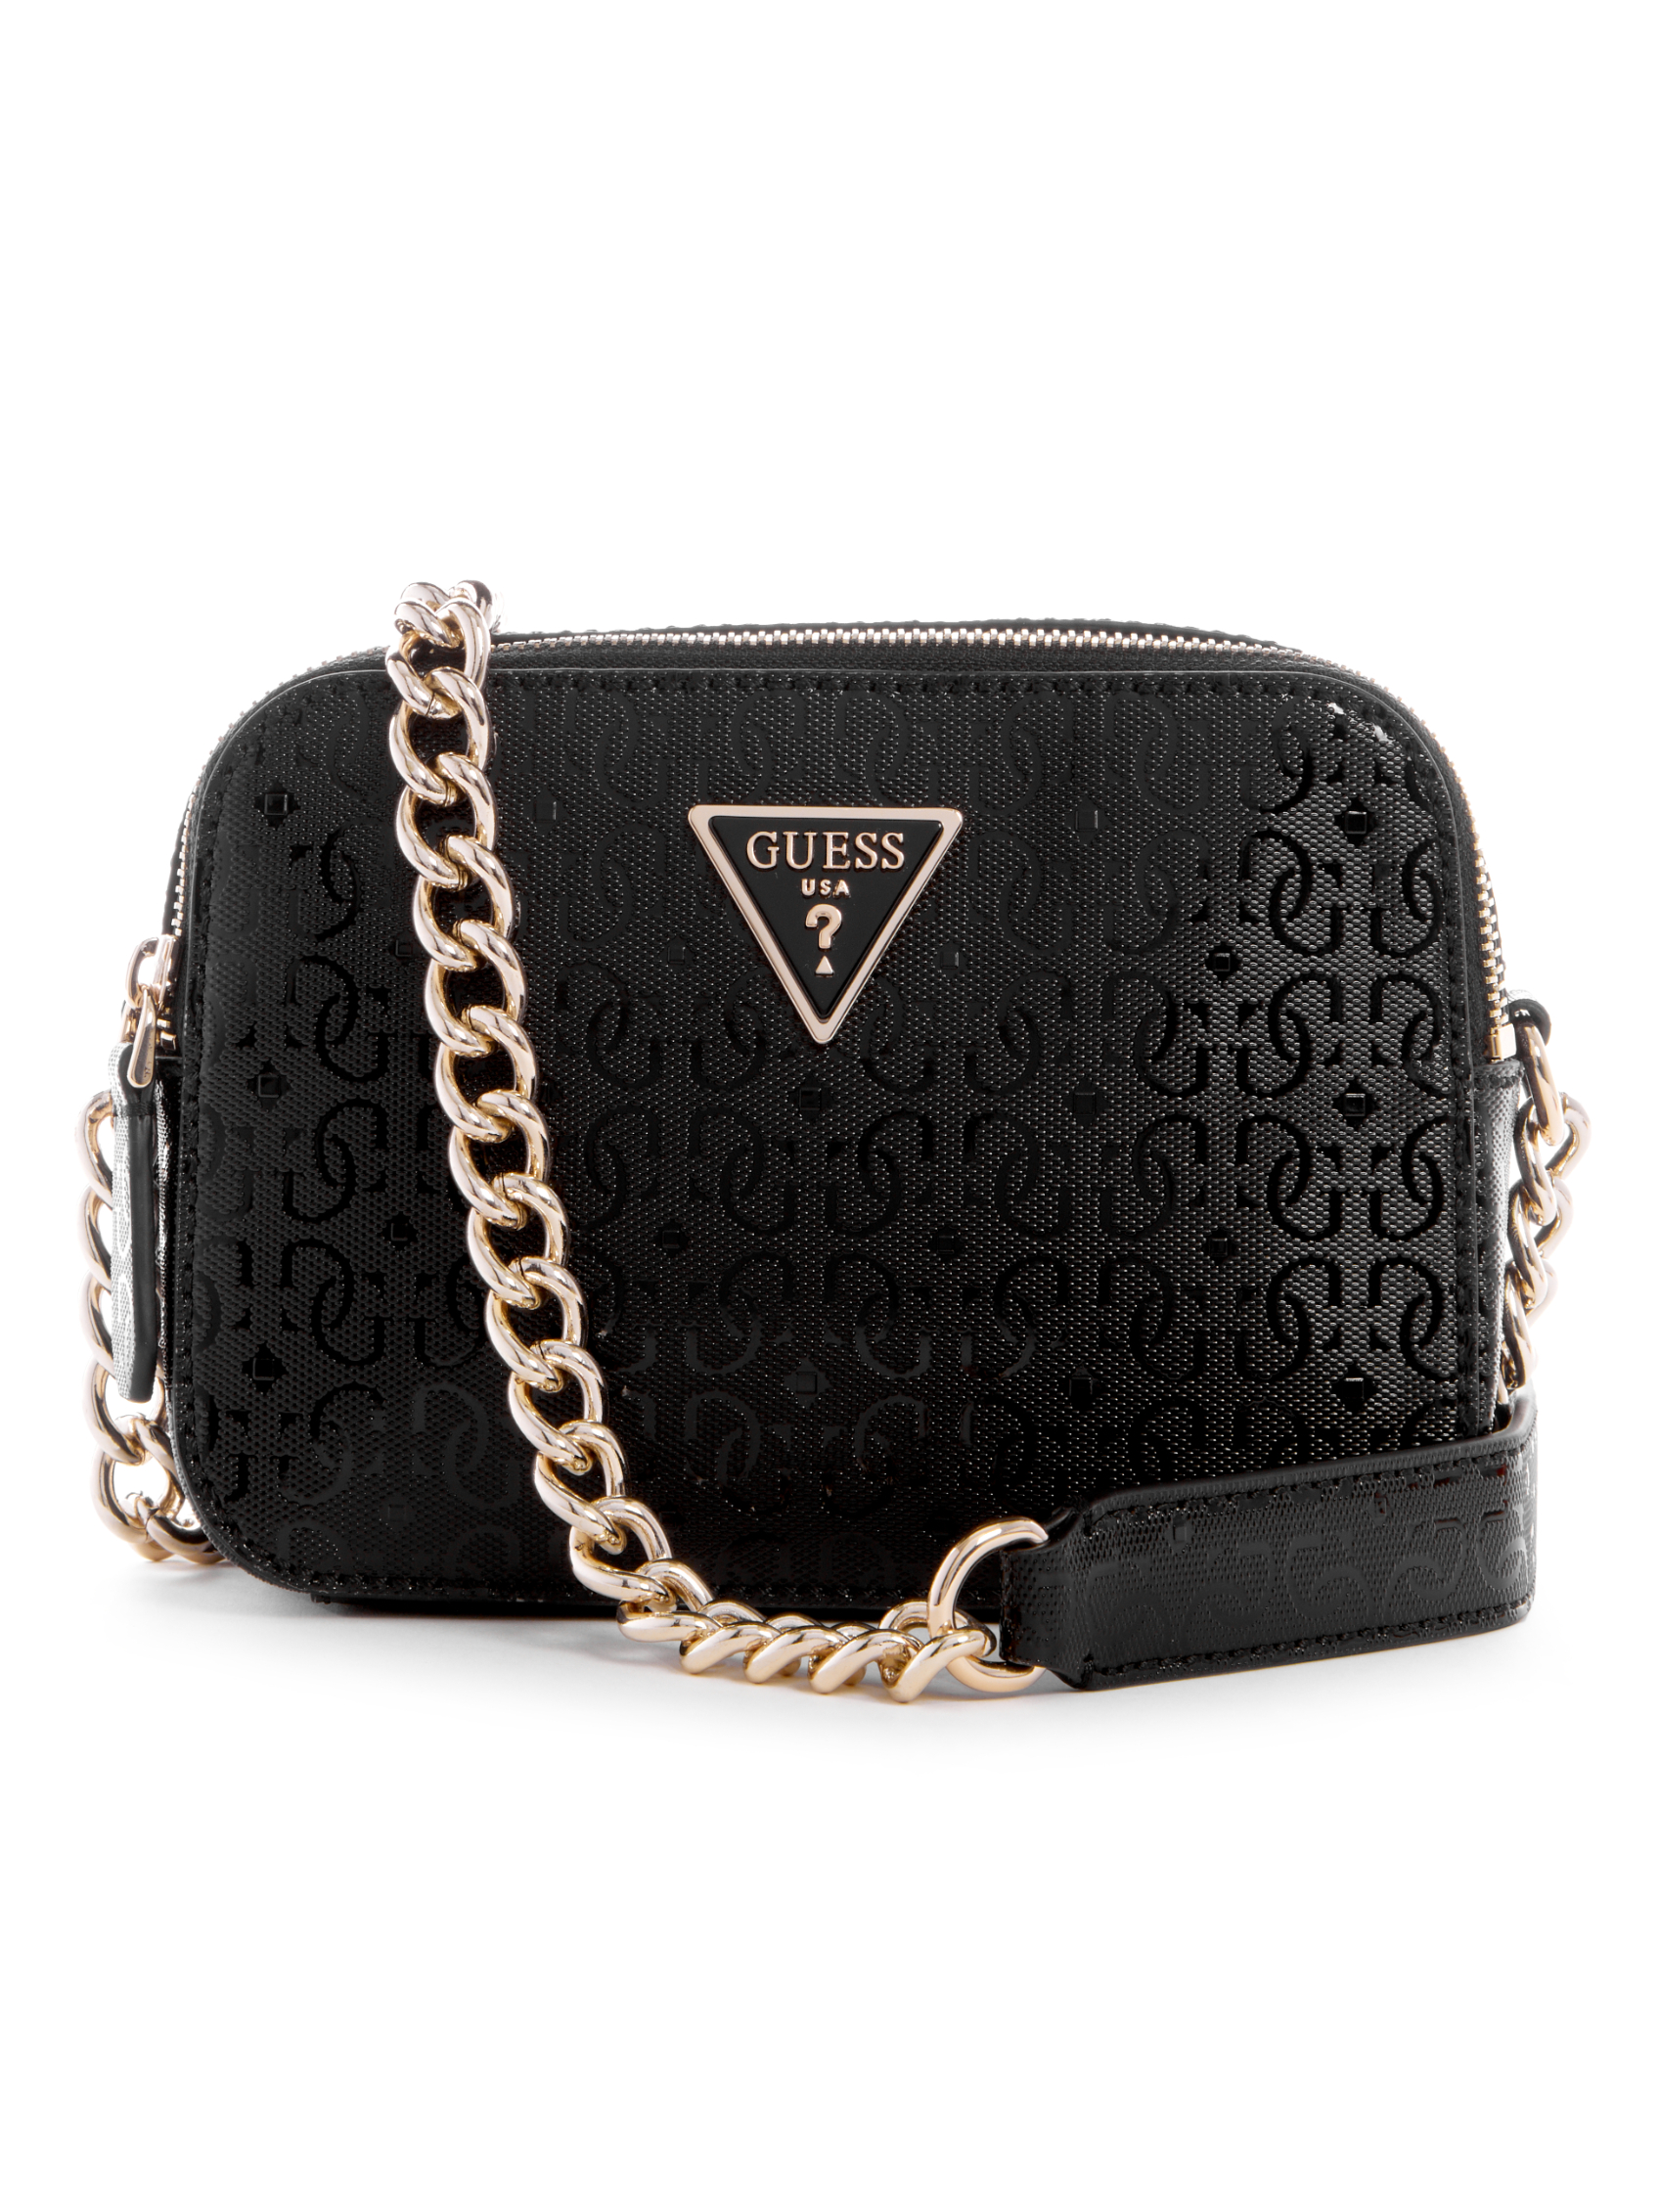 NOELLE CROSSBODY | Guess Philippines